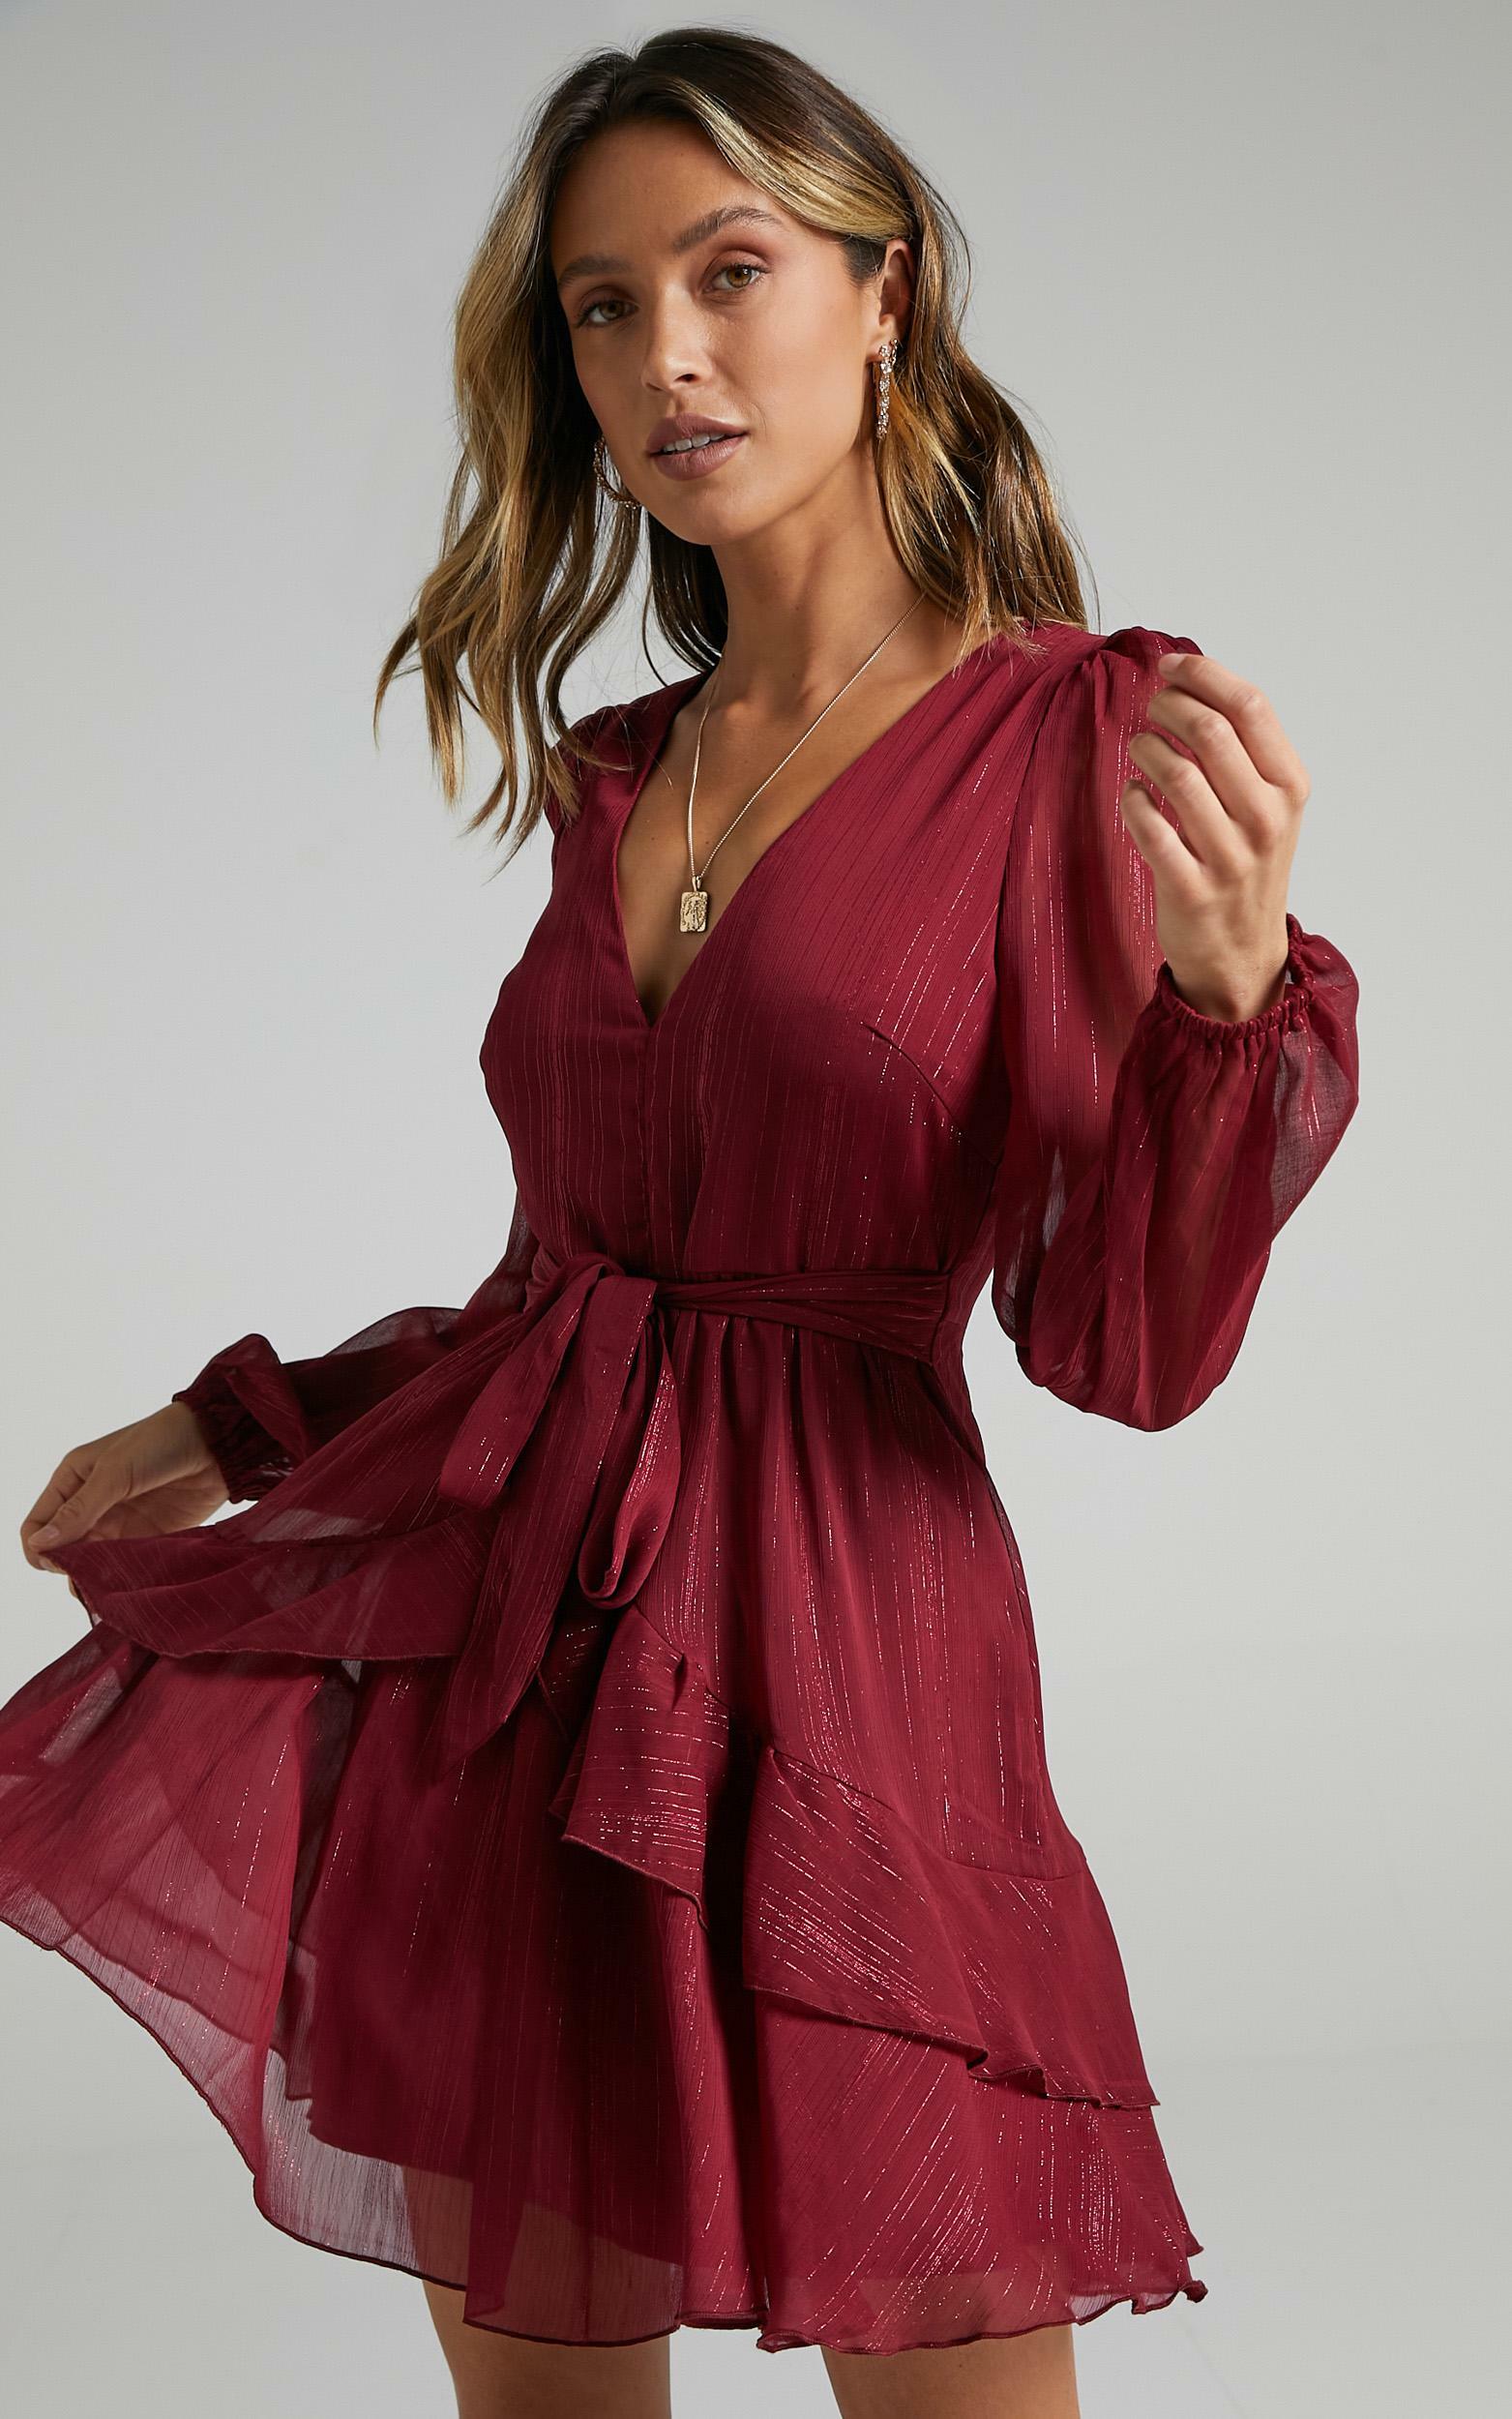 Eyes That Know Me Long Sleeve Ruffle Mini Dress in Wine - 06, WNE3, hi-res image number null